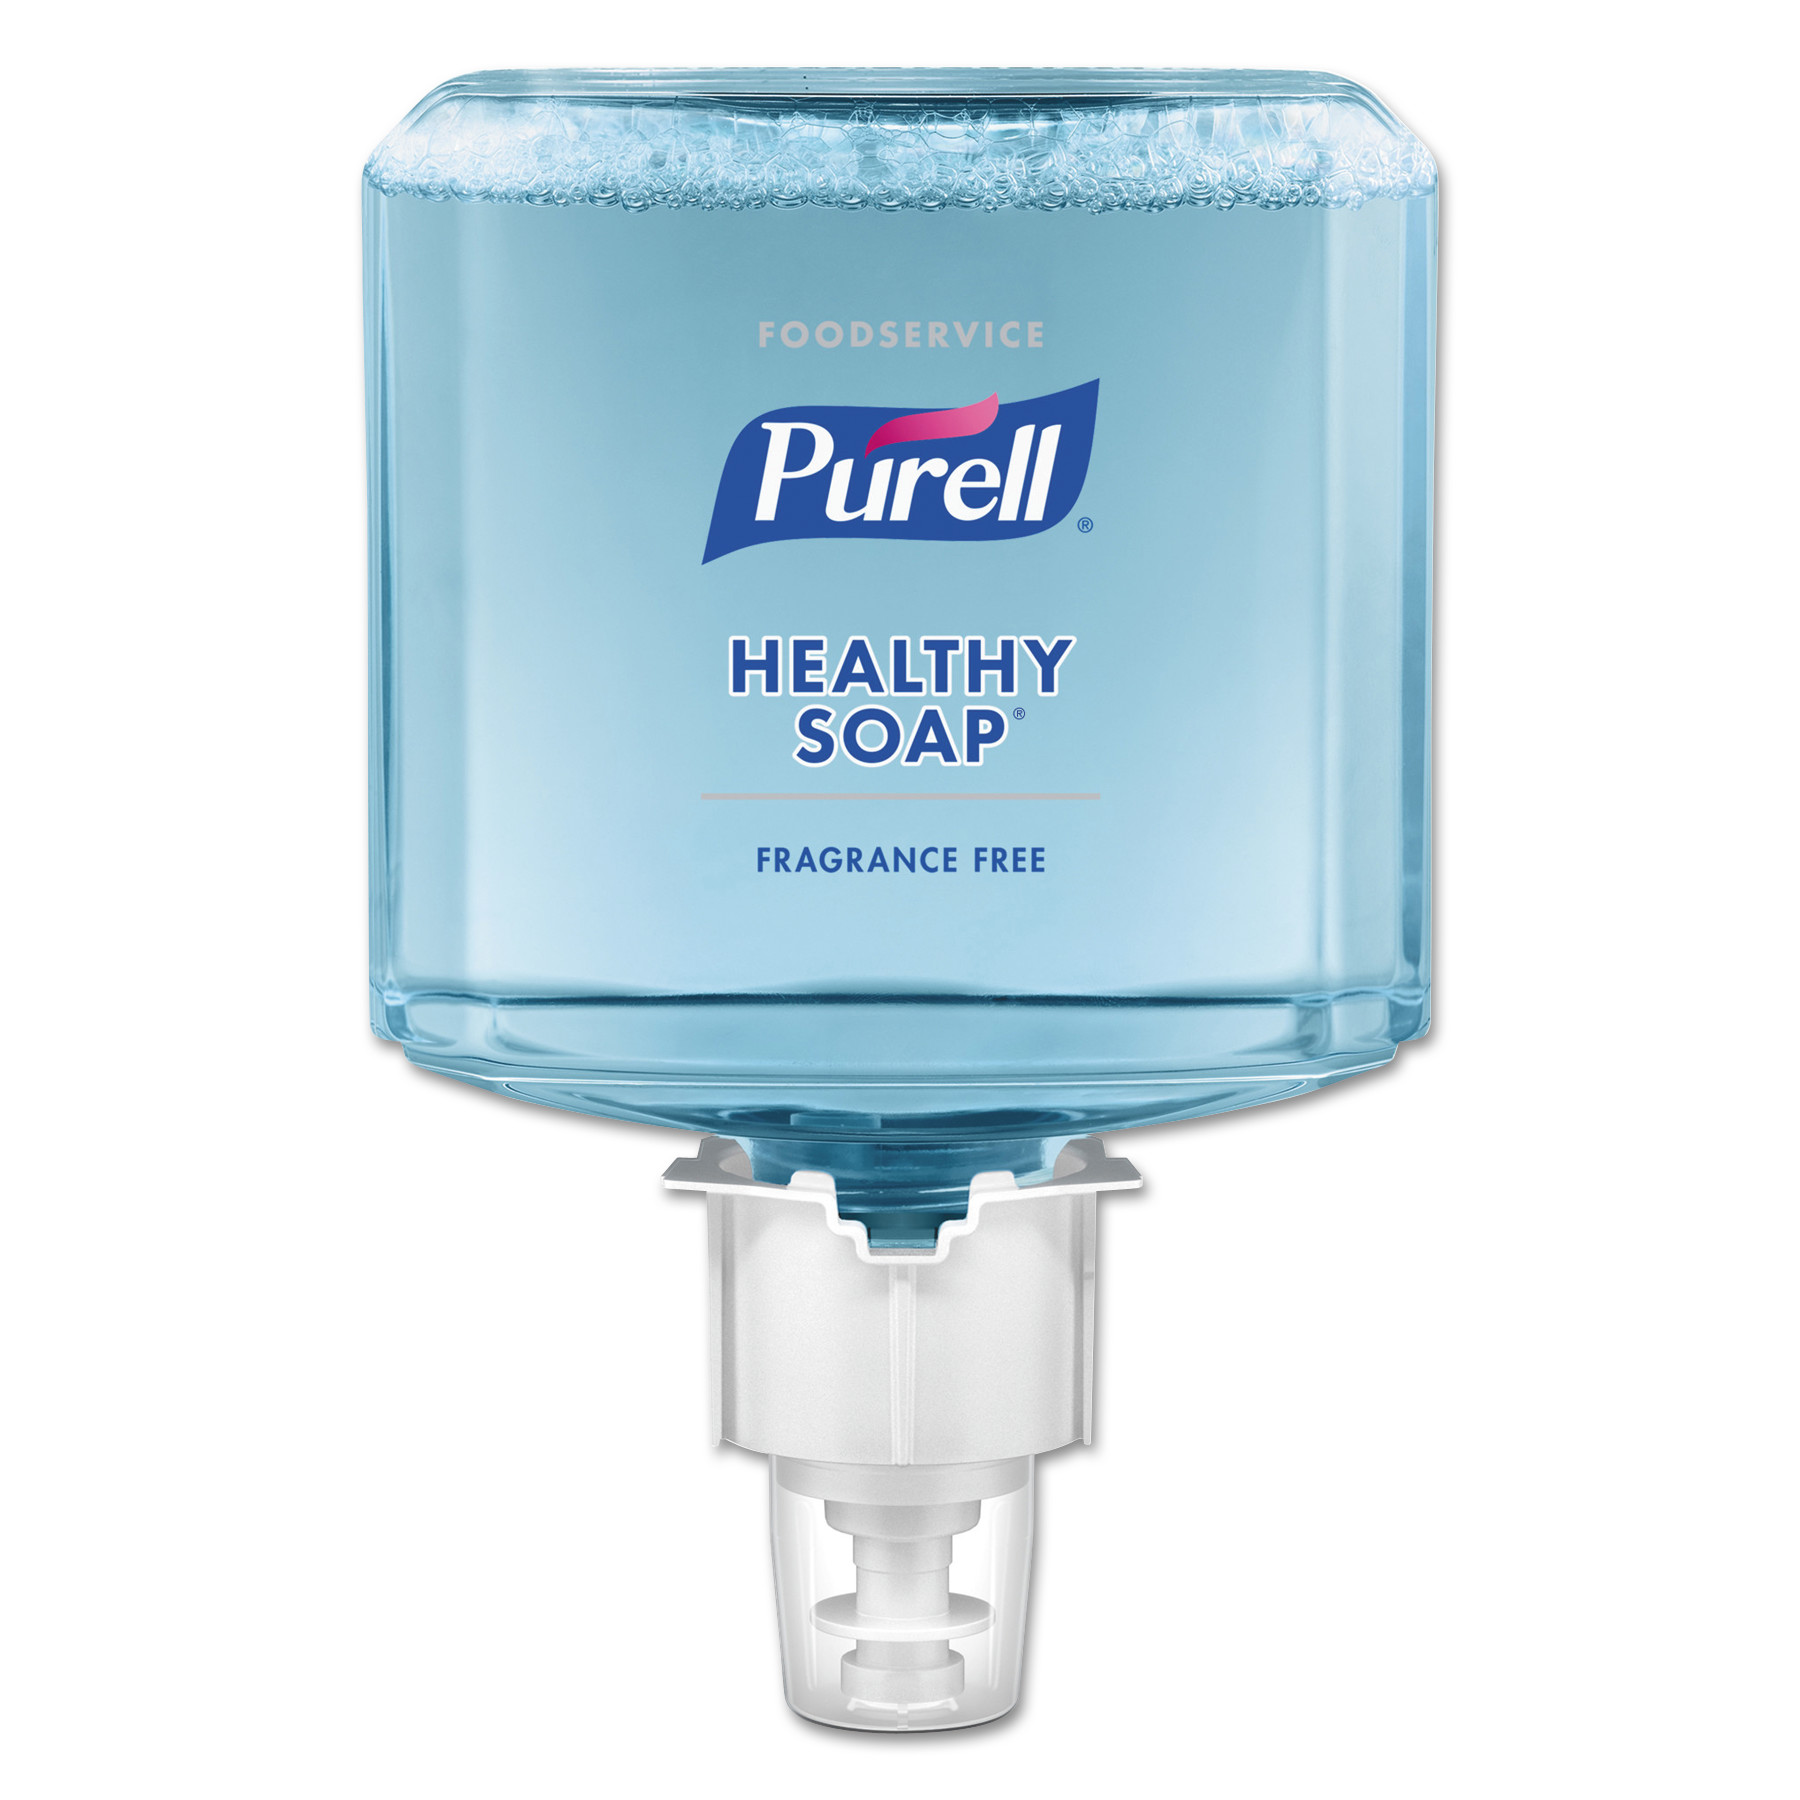  PURELL 5073-02 Foodservice HEALTHY SOAP Fragrance-Free Foam, 1200 mL, For ES4 Dispensers, 2/CT (GOJ507302) 